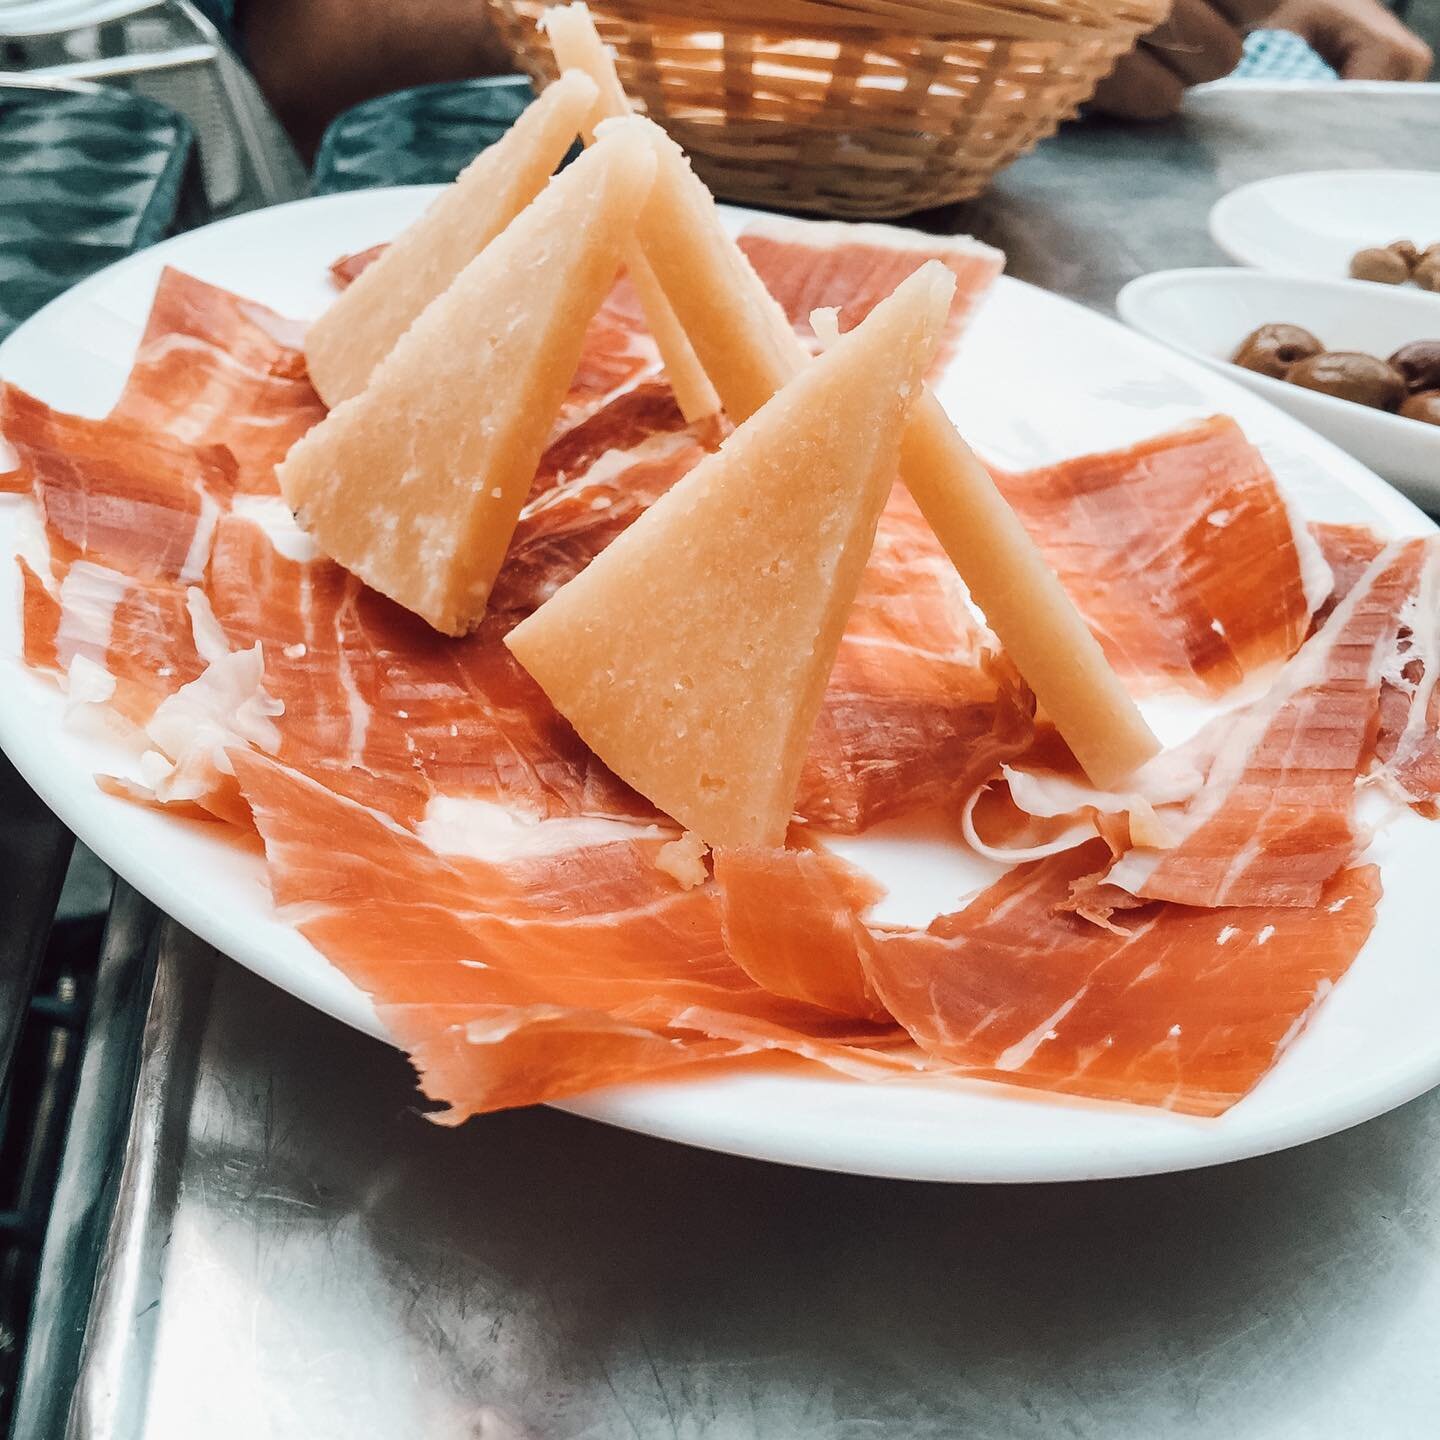 Amazing food tour in Sevilla. If you know me, you know I go on one food tour in each major city I travel. You get a chance to try so many different spots in one night.